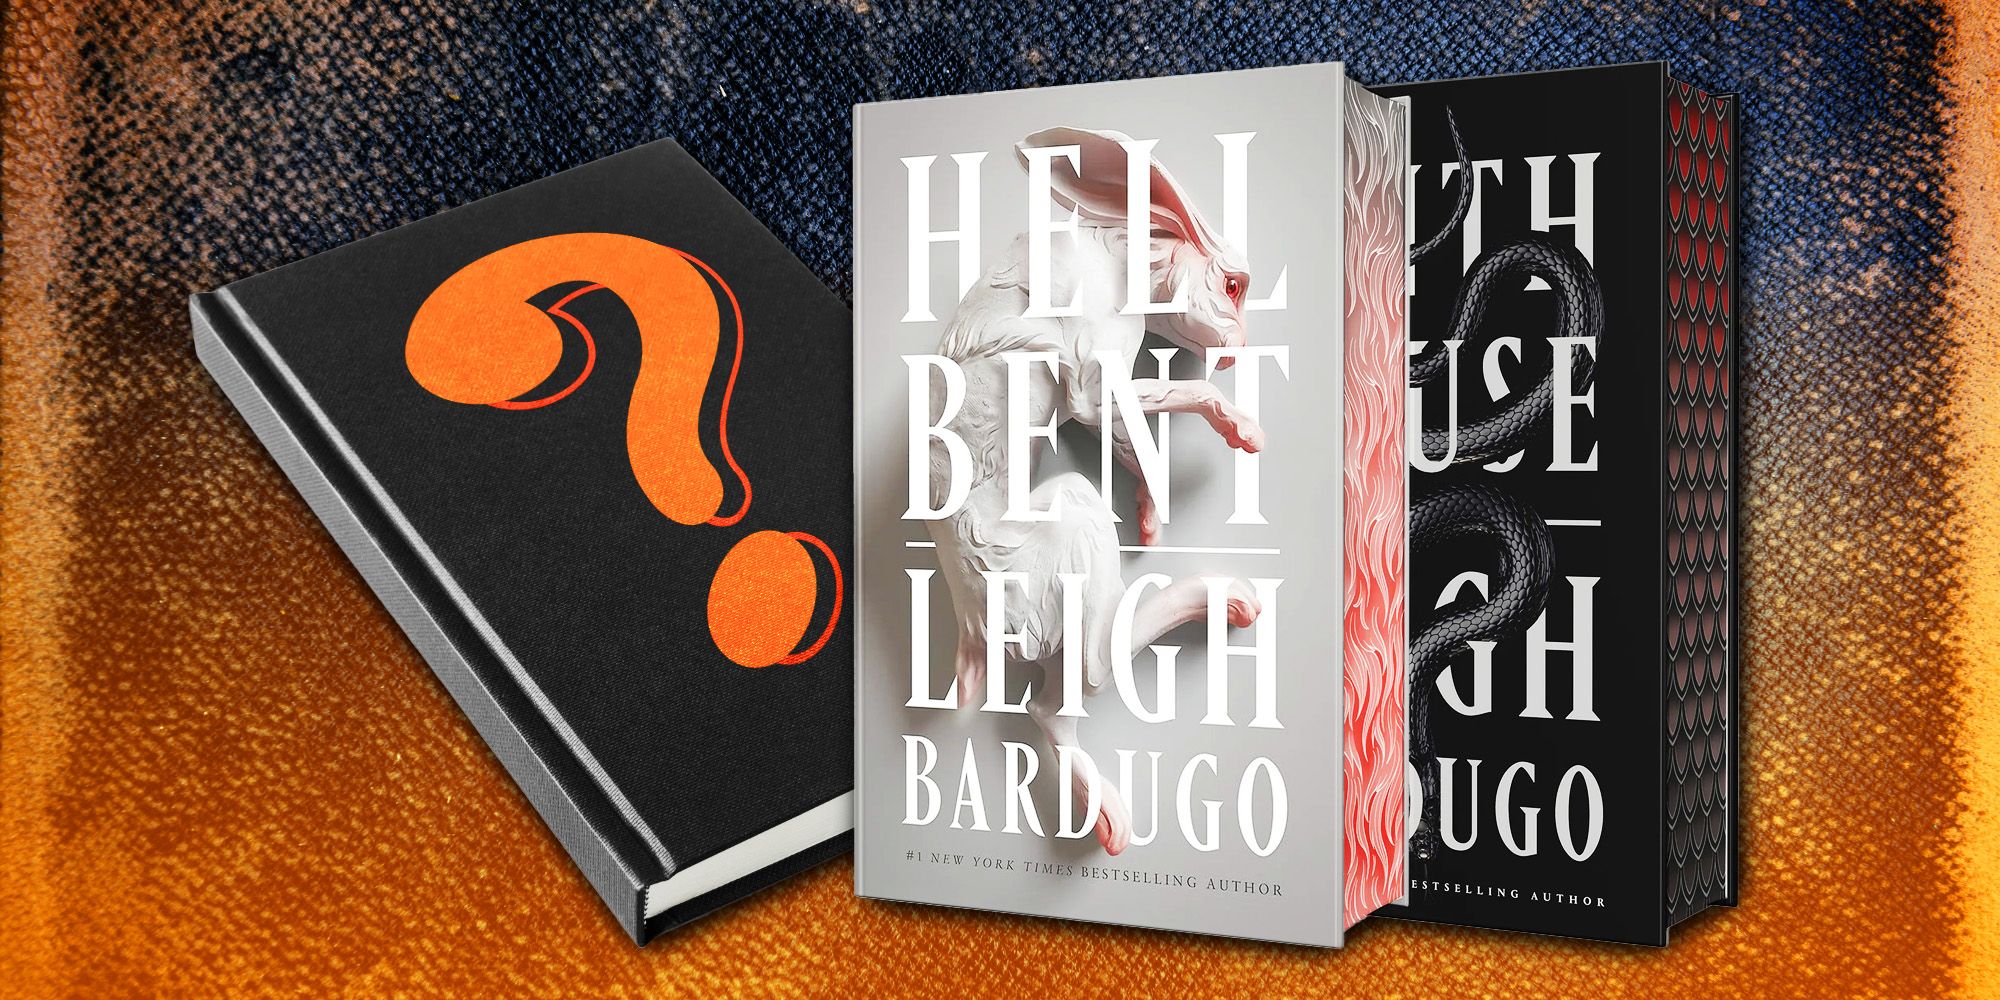 Ninth House and Hell Bent book covers with a mystery book cover